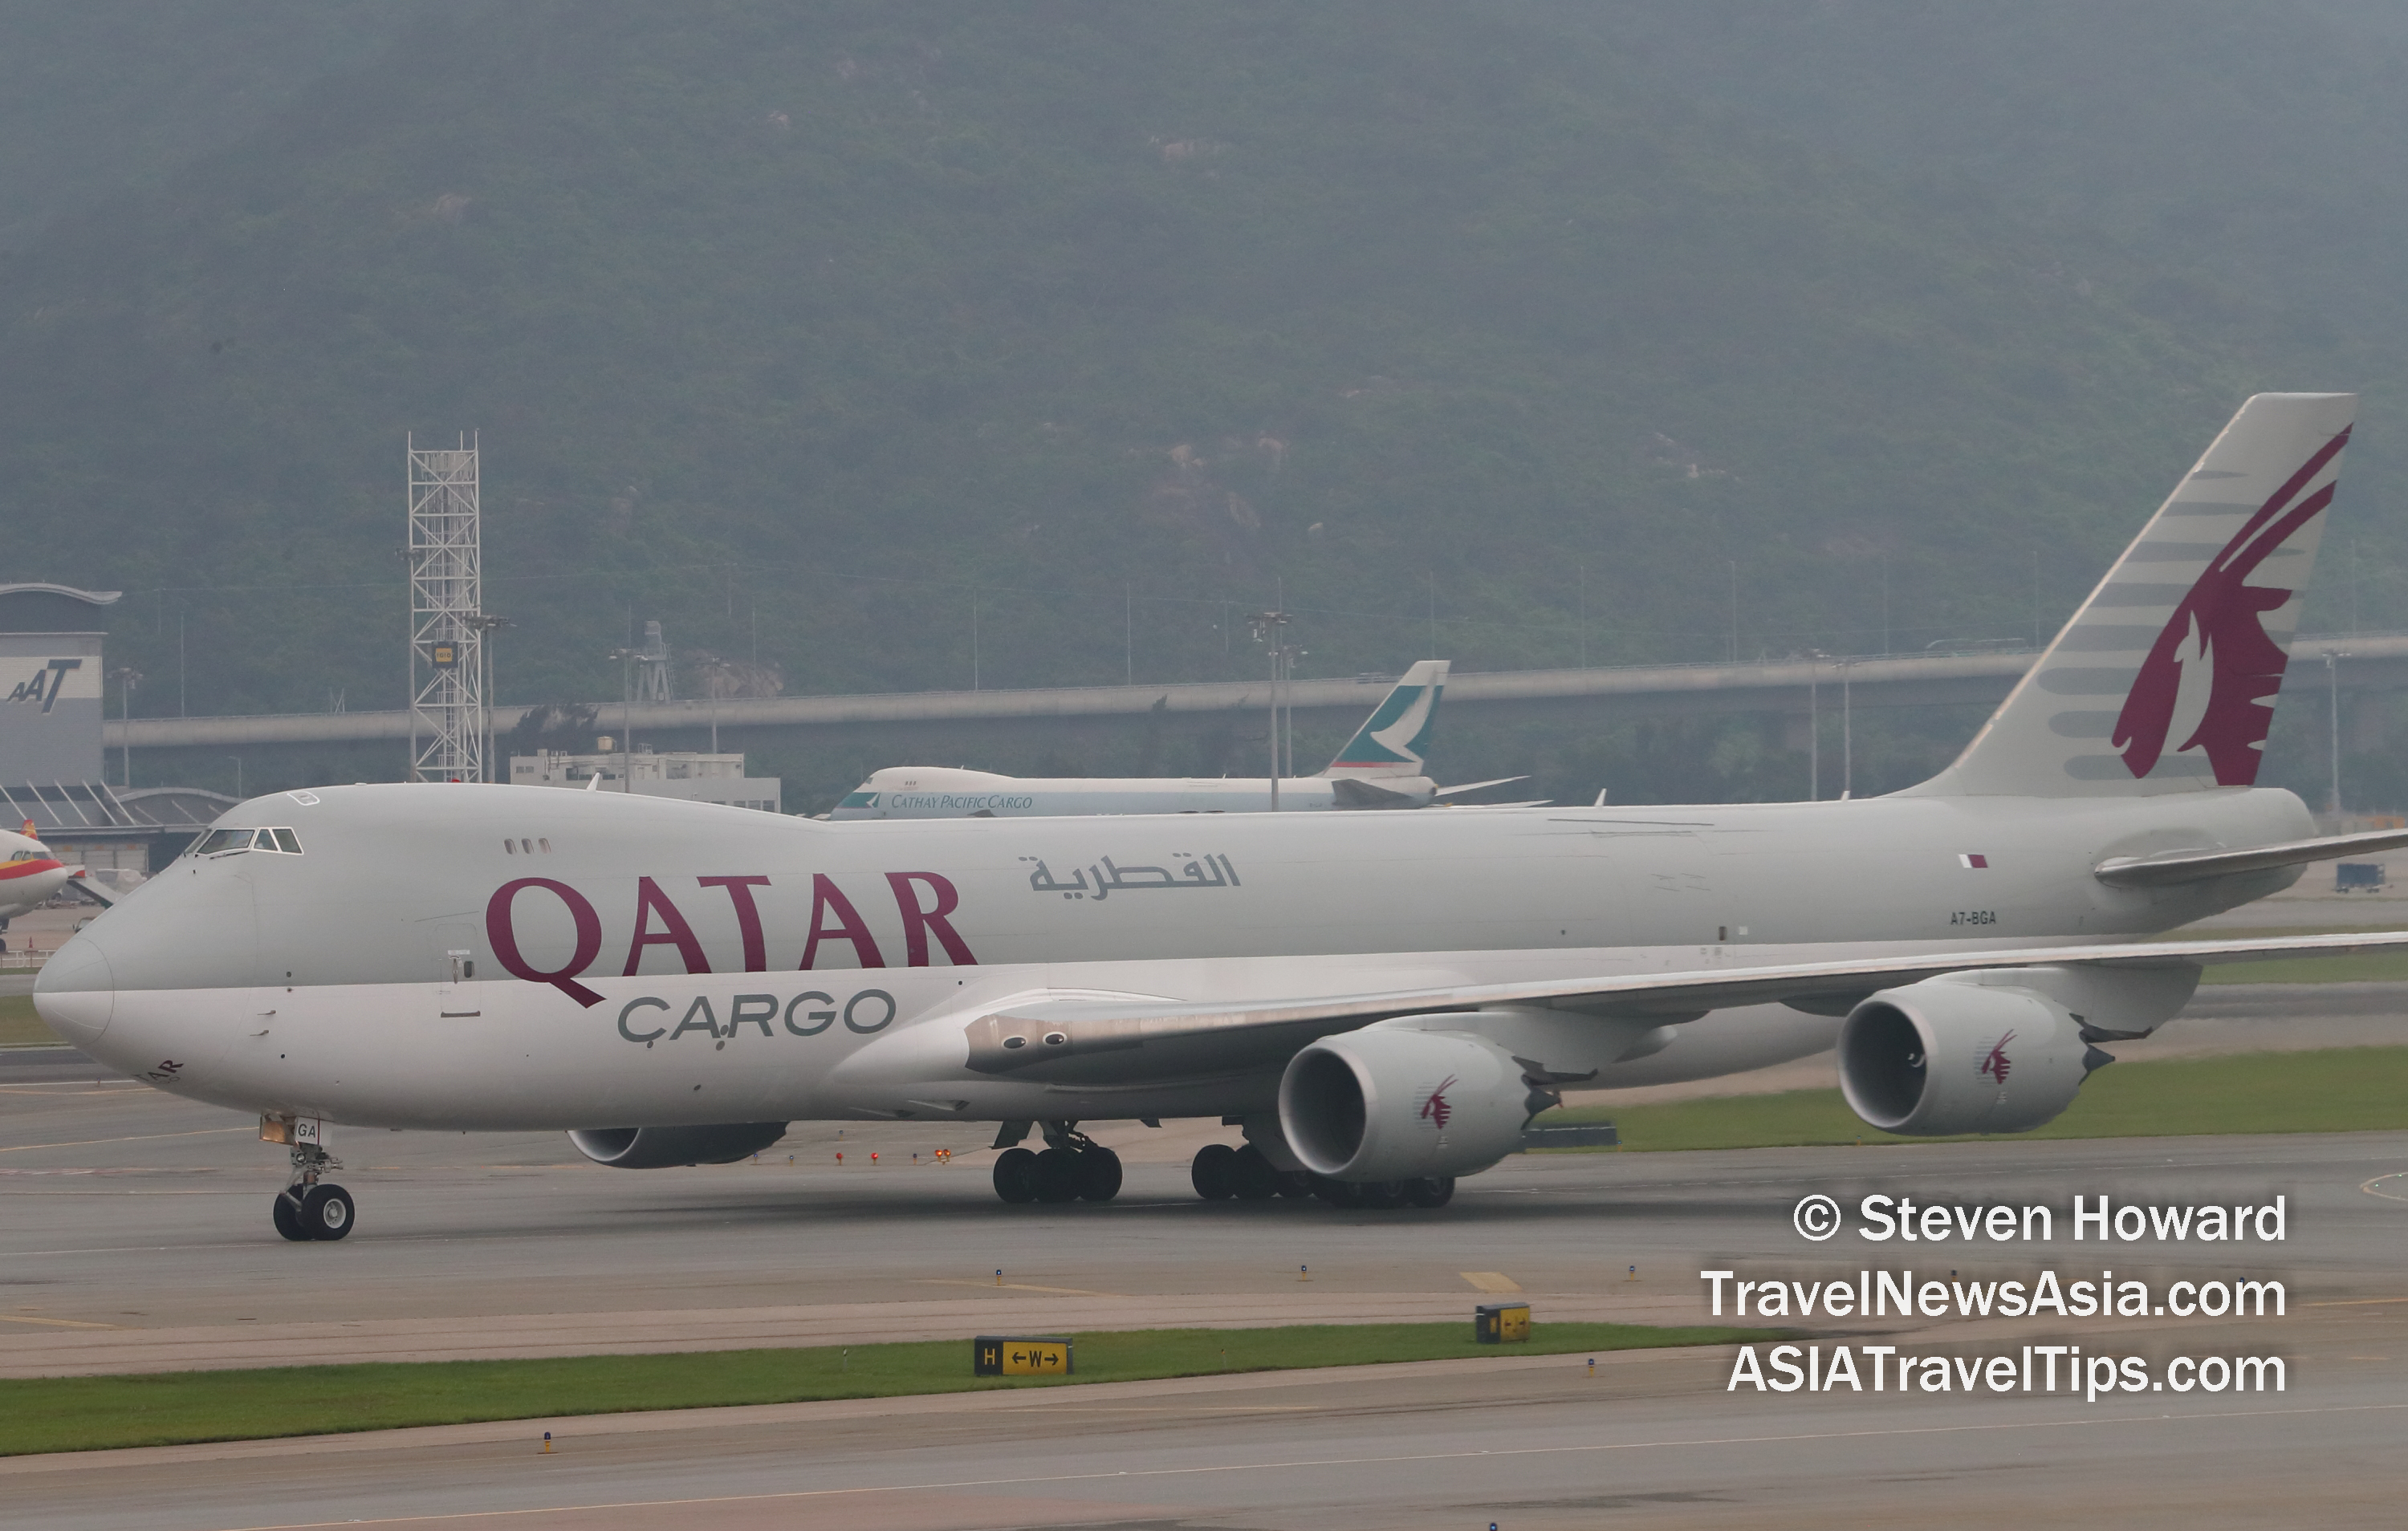 Qatar Airways Boeing 747-8F reg: A7-BGA at HKIA. Picture by Steven Howard of TravelNewsAsia.com Click to enlarge.